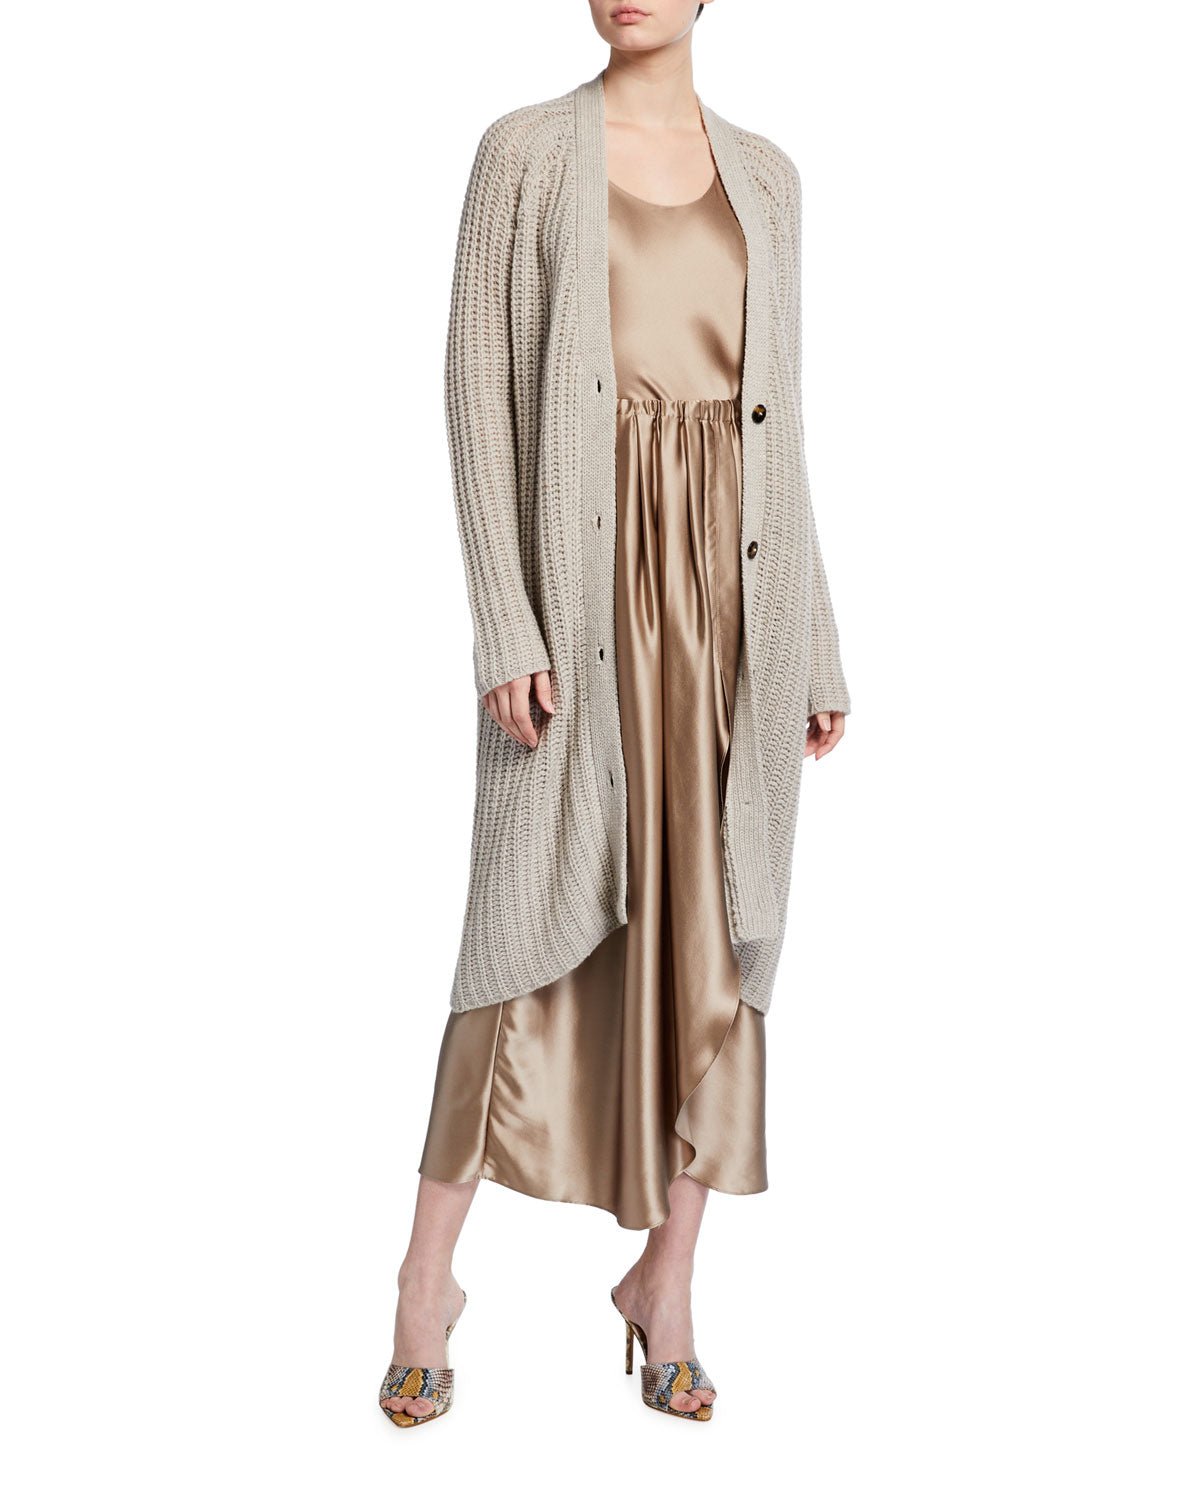 Wyatt V-Neck Long Cashmere Cardigan - thegreatputonmvWyatt V-Neck Long Cashmere CardiganWyatt V-Neck Long Cashmere CardiganWyatt V-Neck Long Cashmere CardiganCardiganSablynthegreatputonmv102712Sablyn "Wyatt" long cardigan. V neckline; button front. Long sleeves. Relaxed silhouette. Hem falls below knees. Cashmere. Dry clean. Imported.S04256697